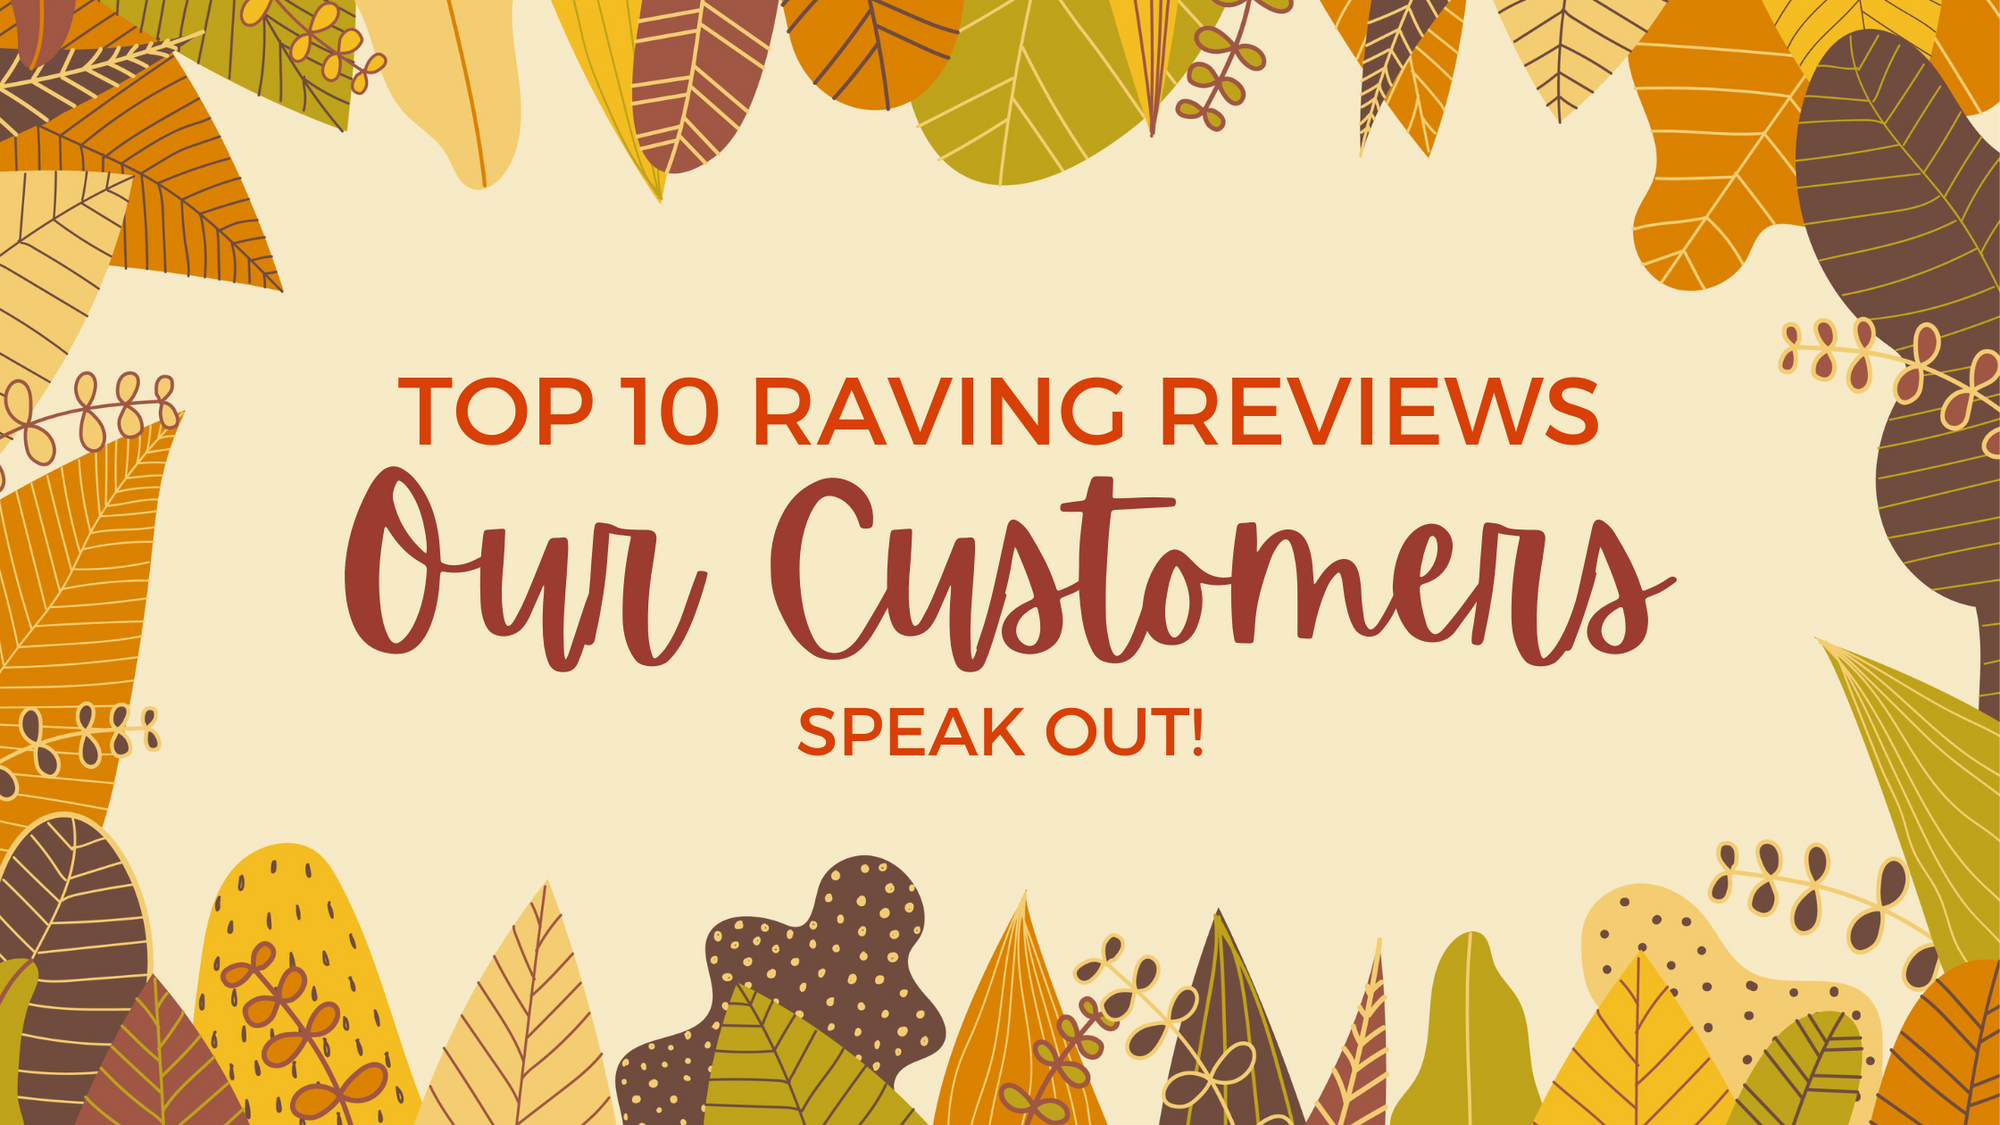 Top 10 Raving Reviews: Our Customers Speak Out! - September 24th